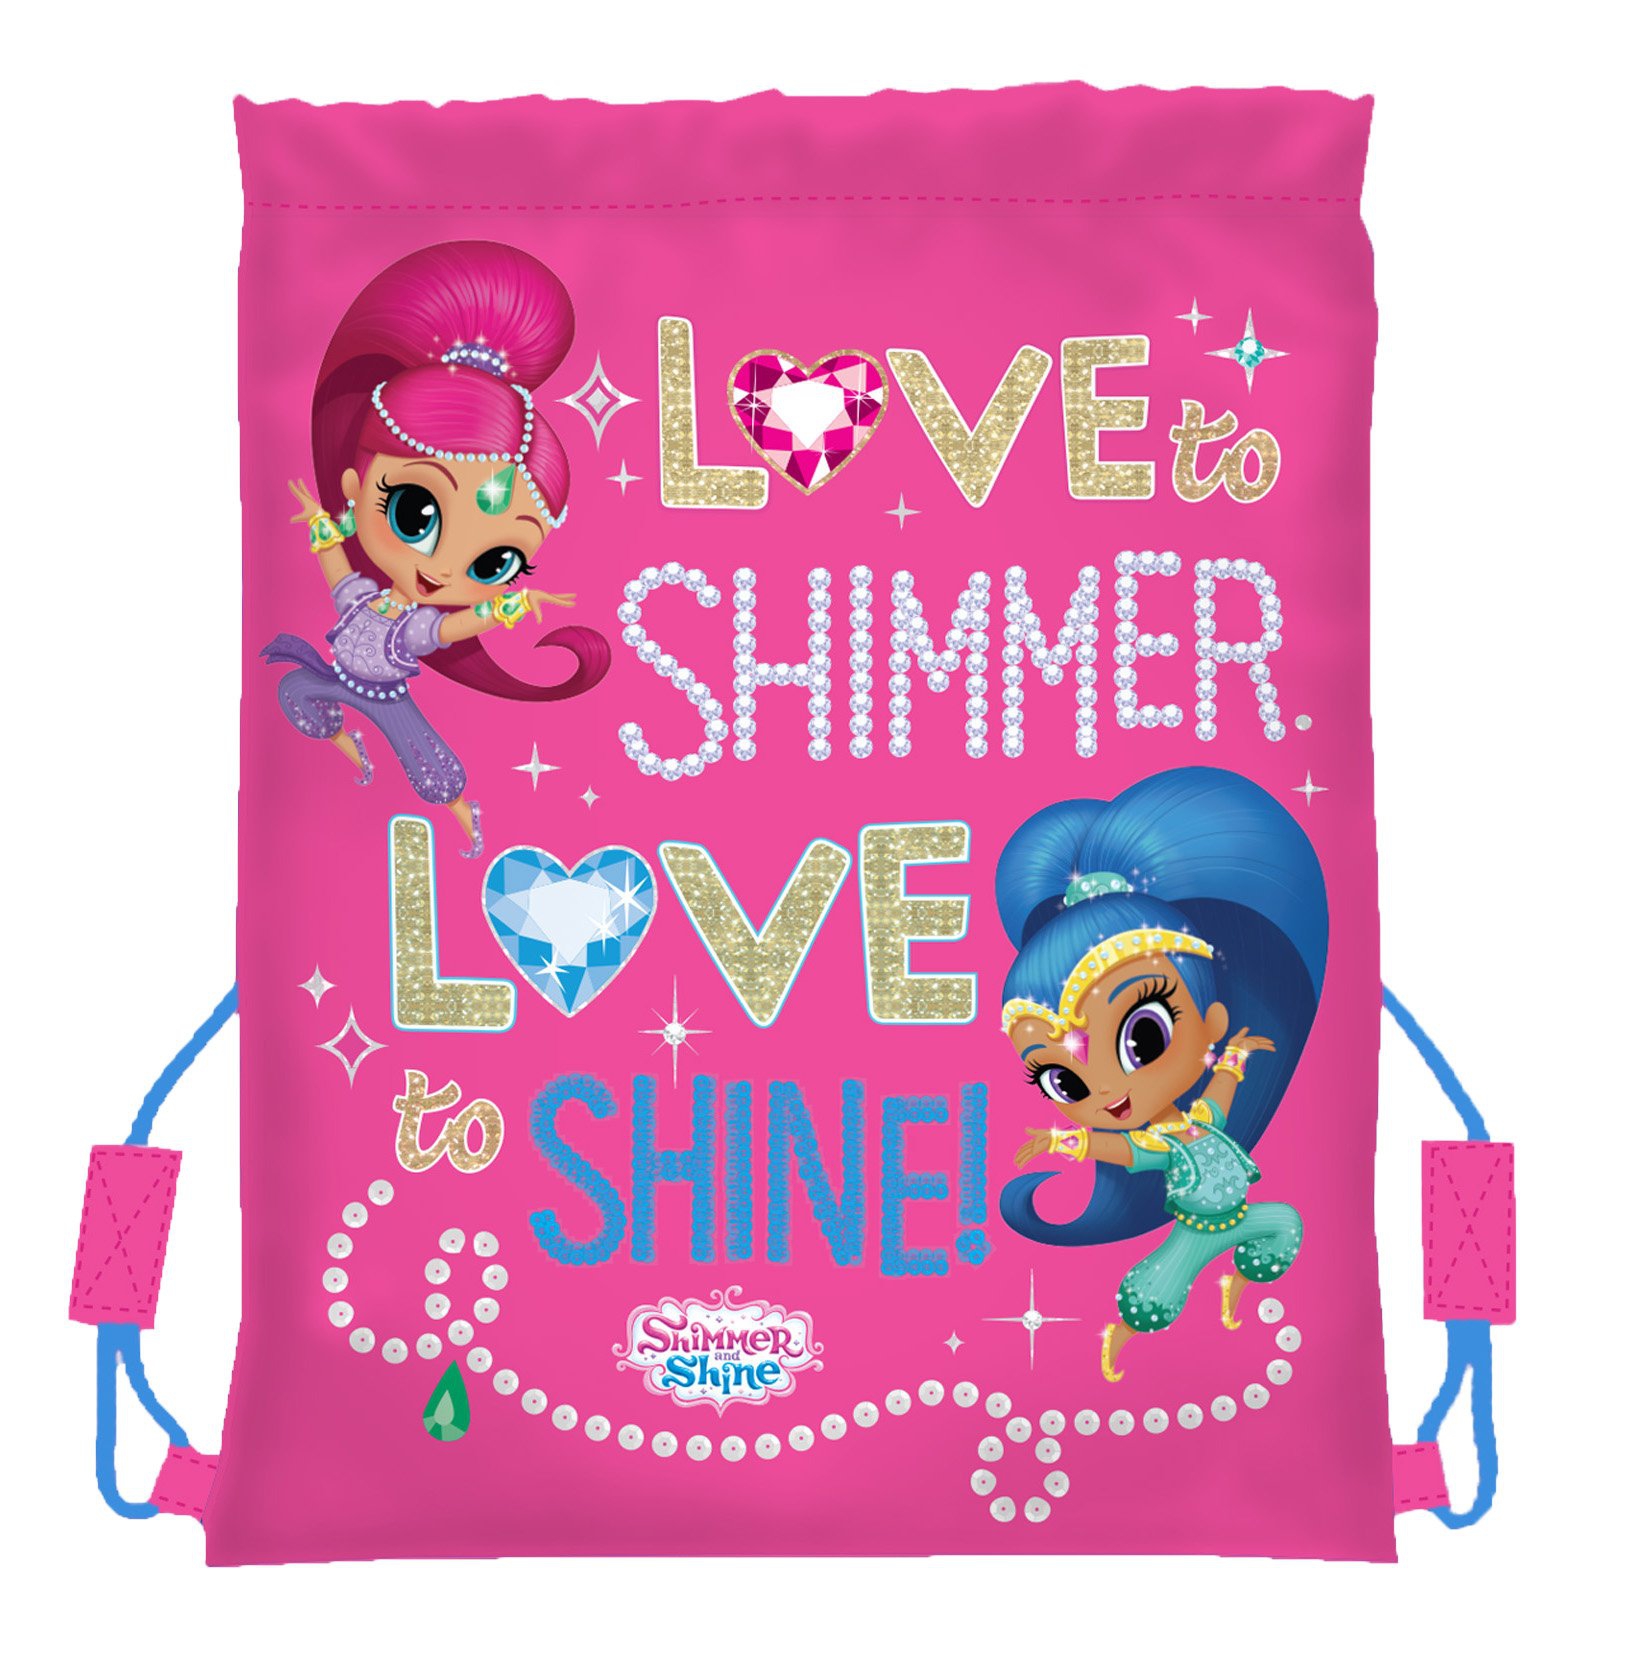 Shimmer and Shine 'Love' School Trainer Bag